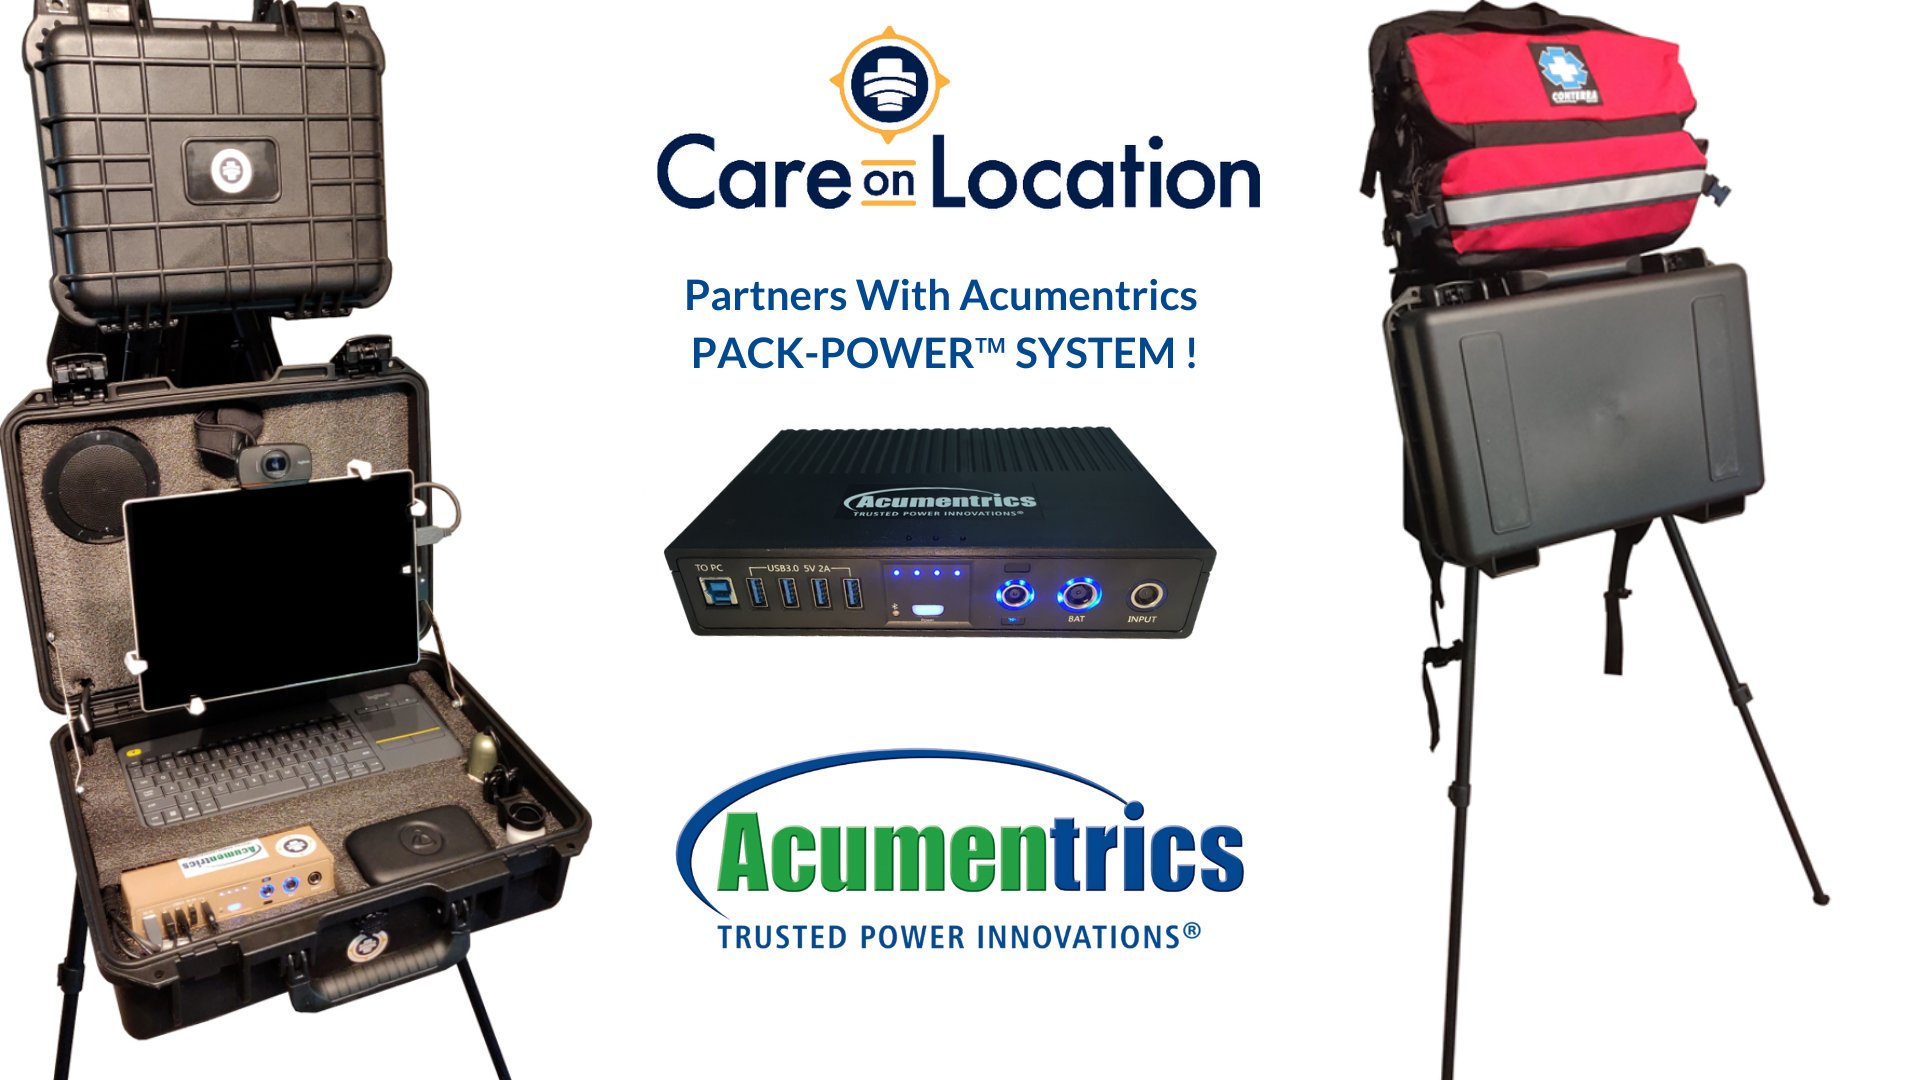 care on location partners with acumentrics